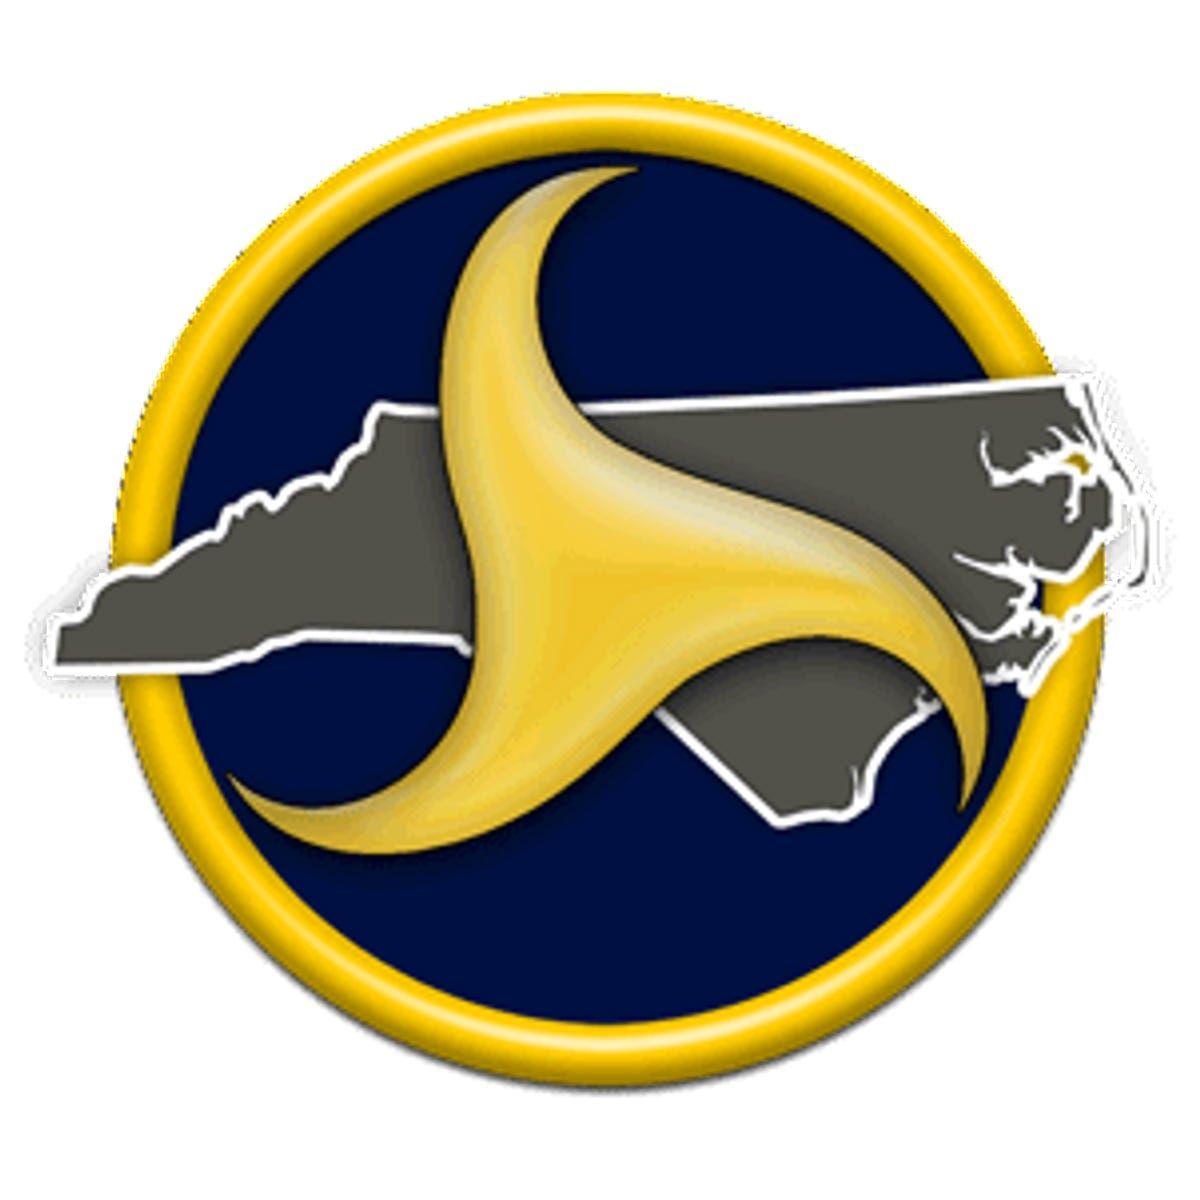 NCDOT Logo - NCDOT Wants To Know Your Top Priority Transportation Projects